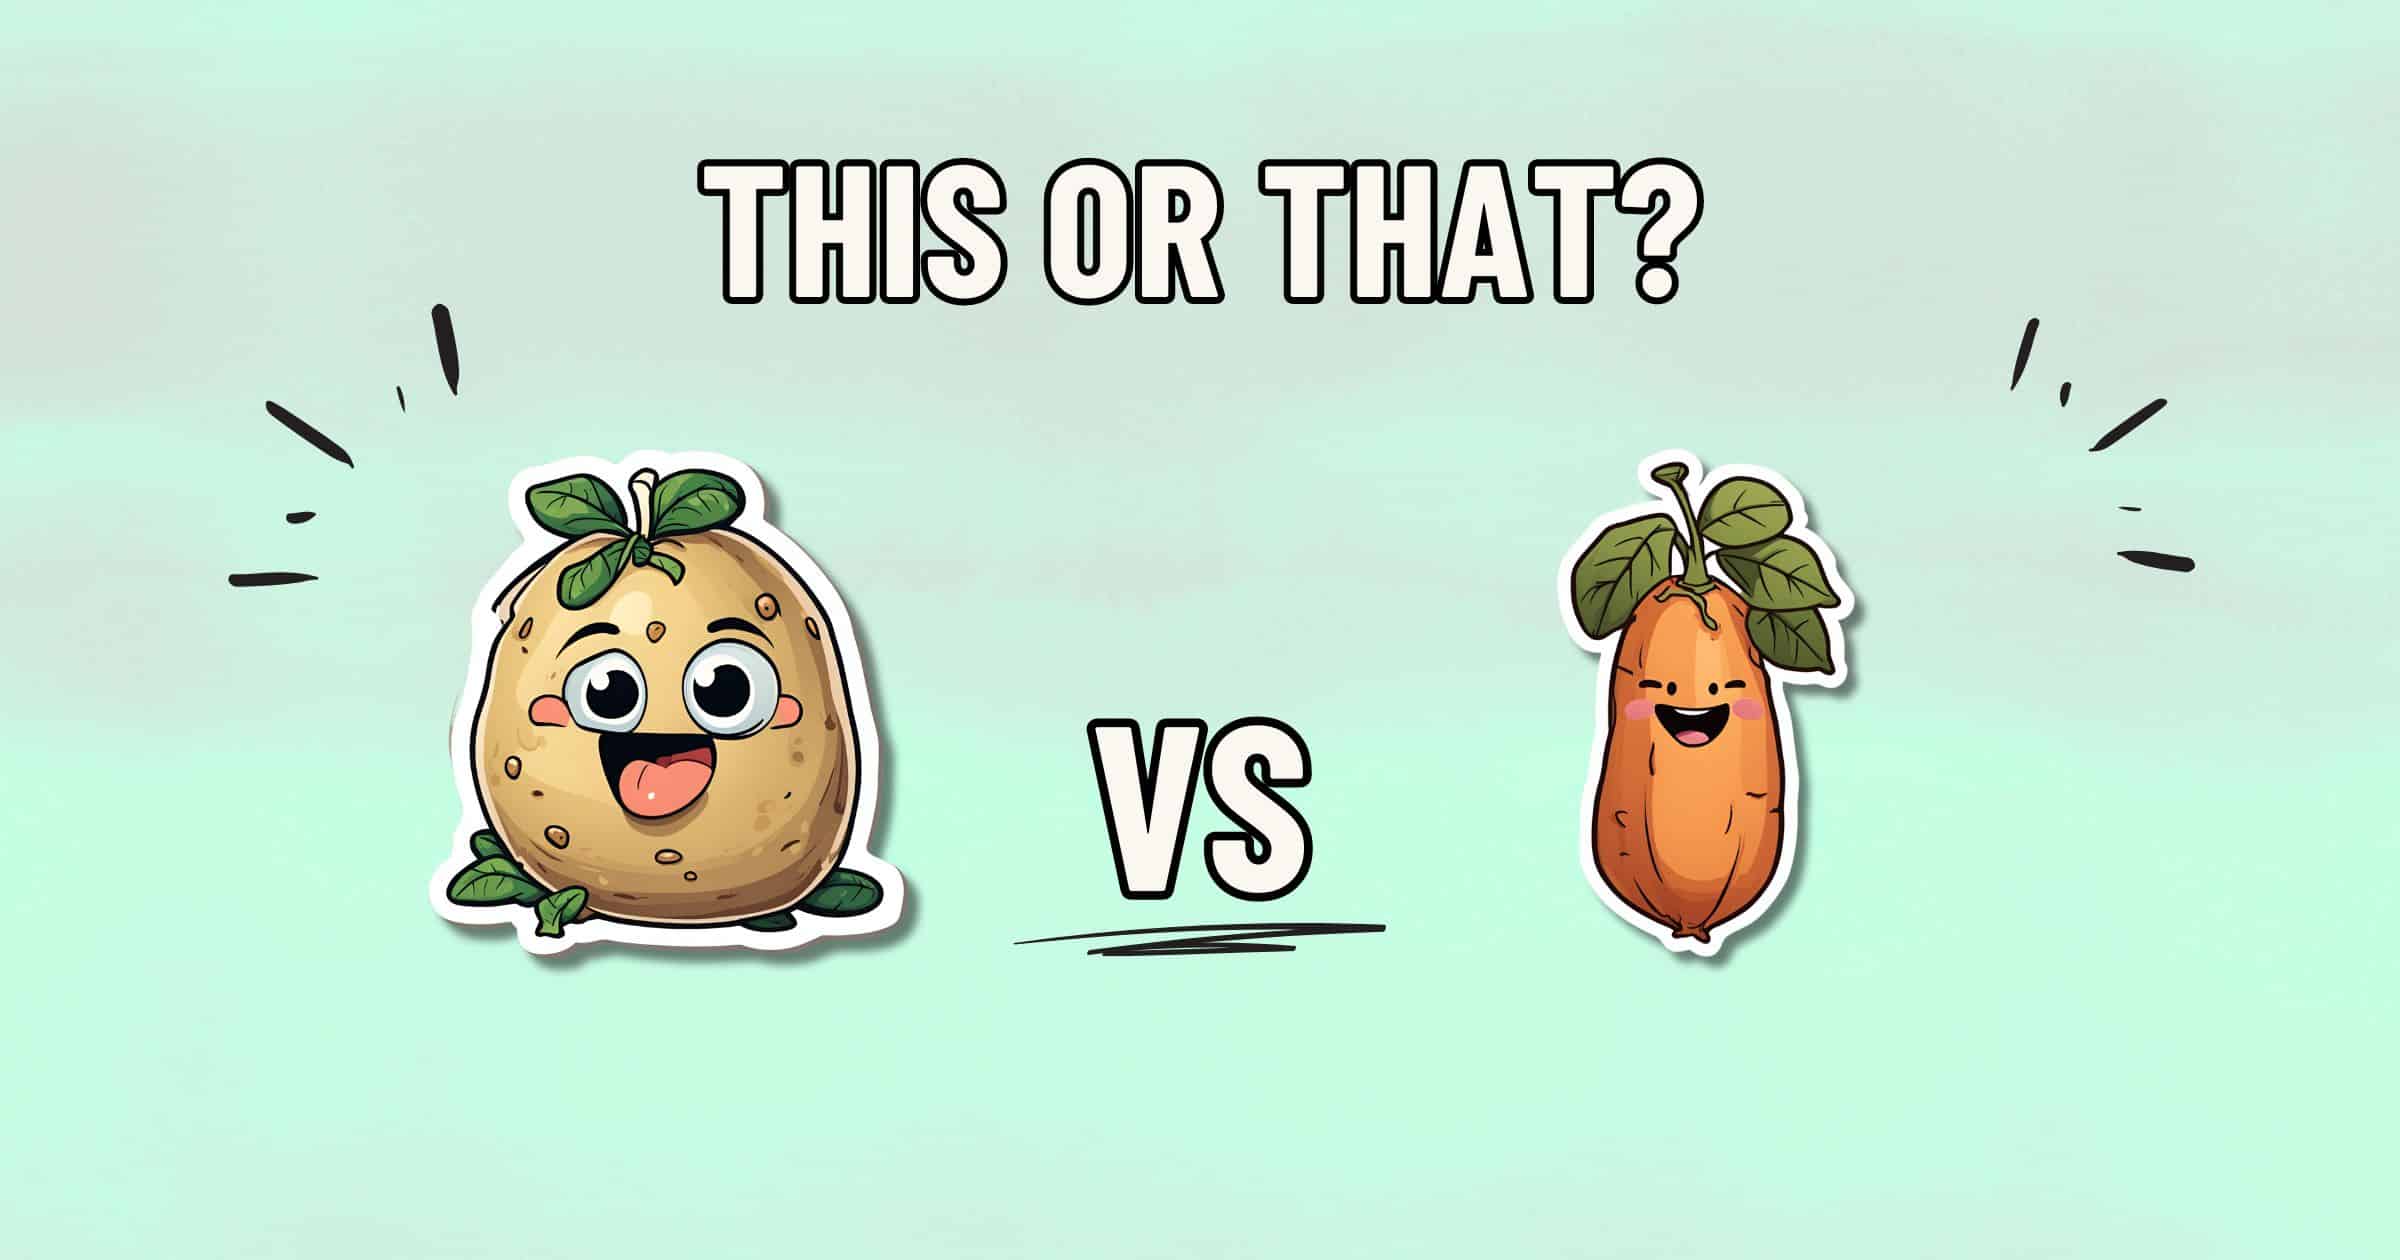 Cartoon image with a light green background. On the left, a happy white potato character with leaves on its head. On the right, a smiling sweet potato carrot character with leaves. "THIS OR THAT?" text at the top and "VS" in the center below the characters. Which is healthier?